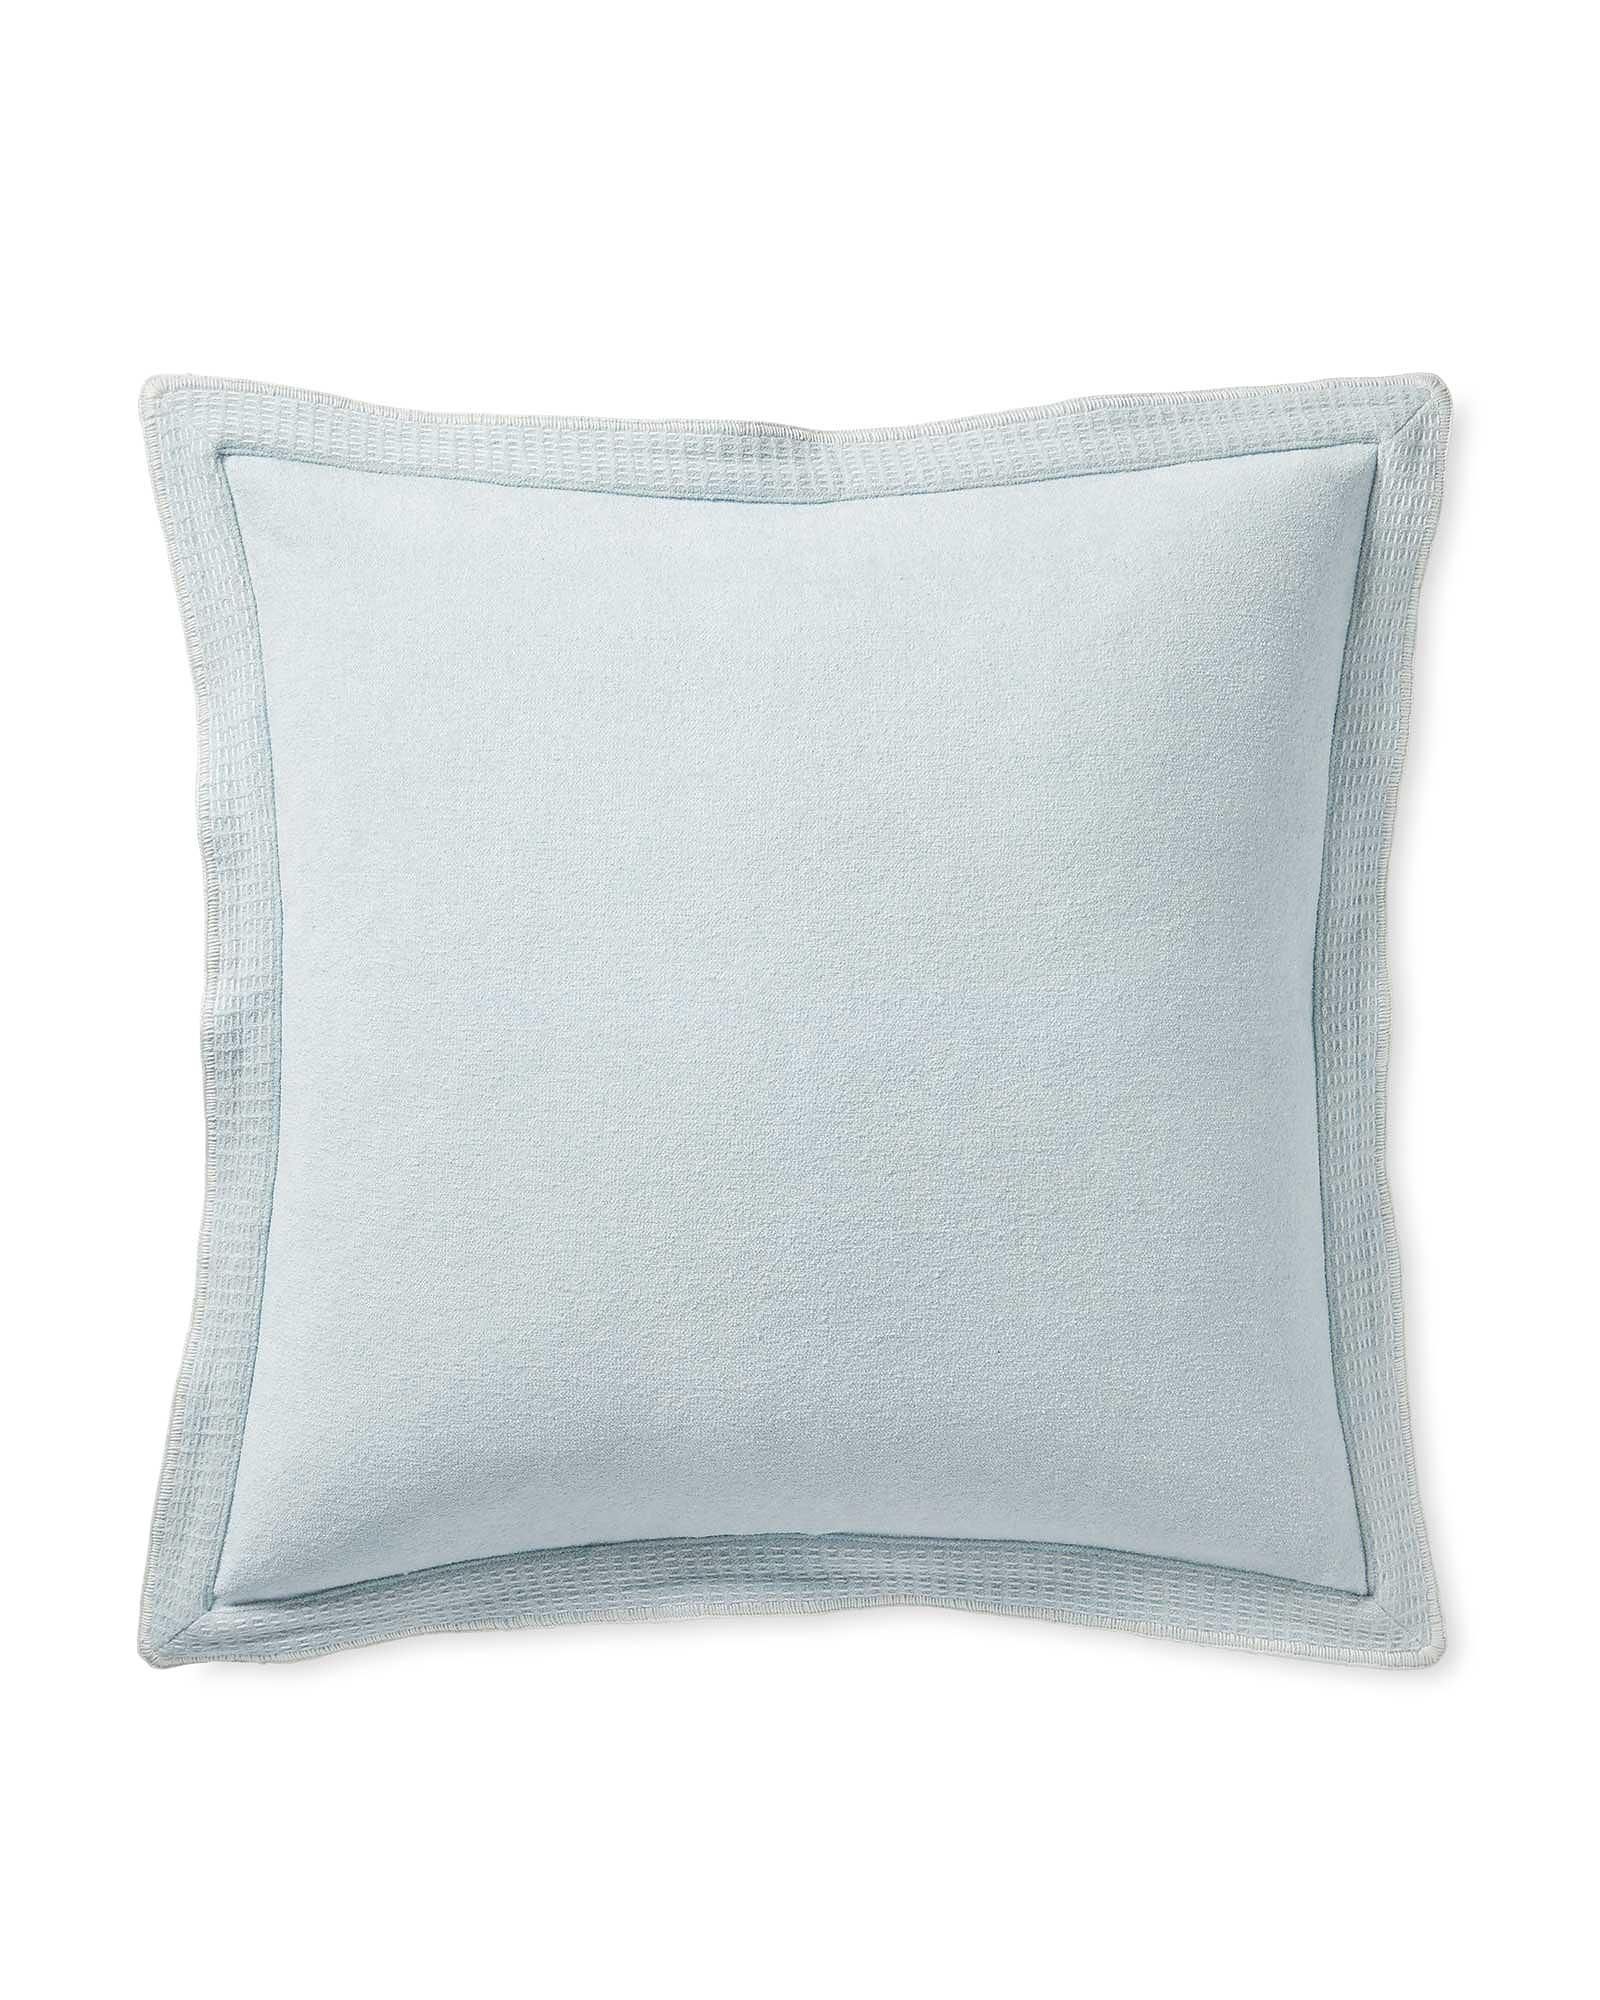 Linen Chenille Pillow Cover | Serena and Lily